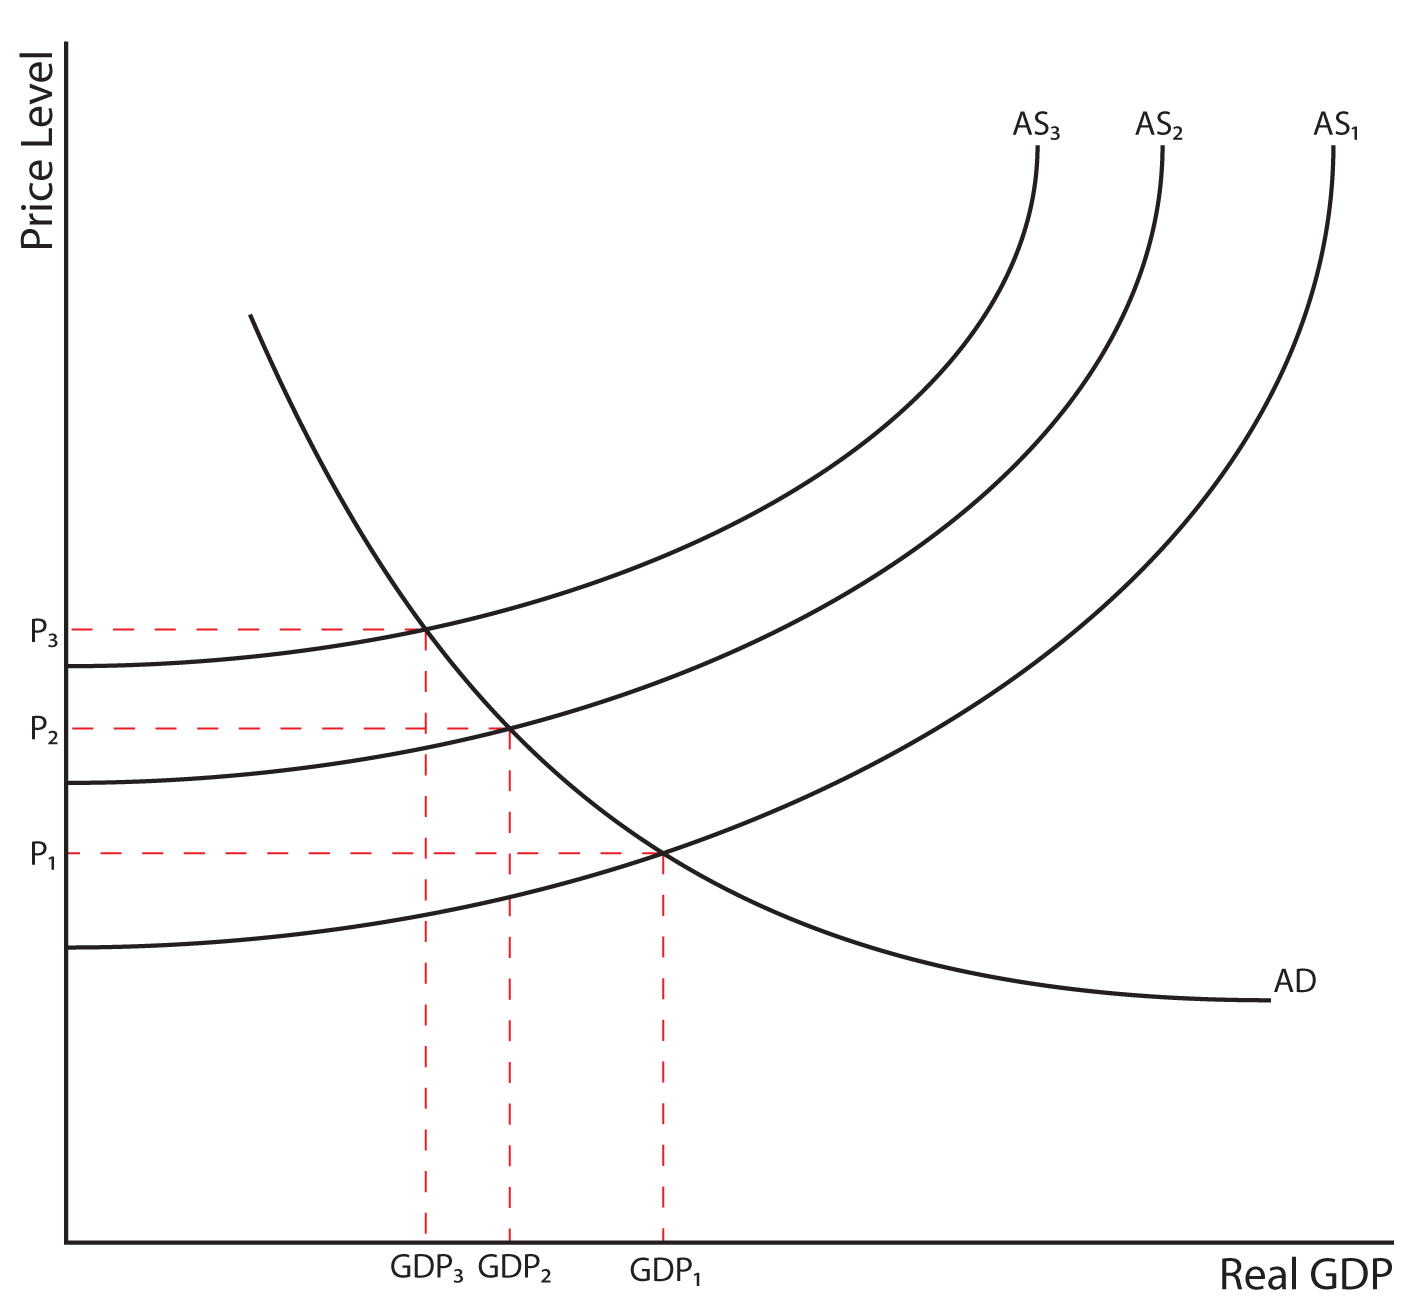 Image 8.07: The image shows a graph.  The y axis is labeled Price Level. The x axis is labeled Real GDP. There are three positively curved lines and one negatively curved line. The negatively curved line is labeled AD. The first positively curved line is labeled AS subscript 1 and intersects AD at P subscript 1 on the y axis, and GDP subscript 1 on the x axis. The second positively curved line is labeled AS subscript 2 and intersects AD at P subscript 2 on the y axis, and GDP subscript 2 on the x axis. The third positively curved line is labeled AS subscript 3 and intersects AD at P subscript 3 on the y axis, and GDP subscript 3 on the x axis.